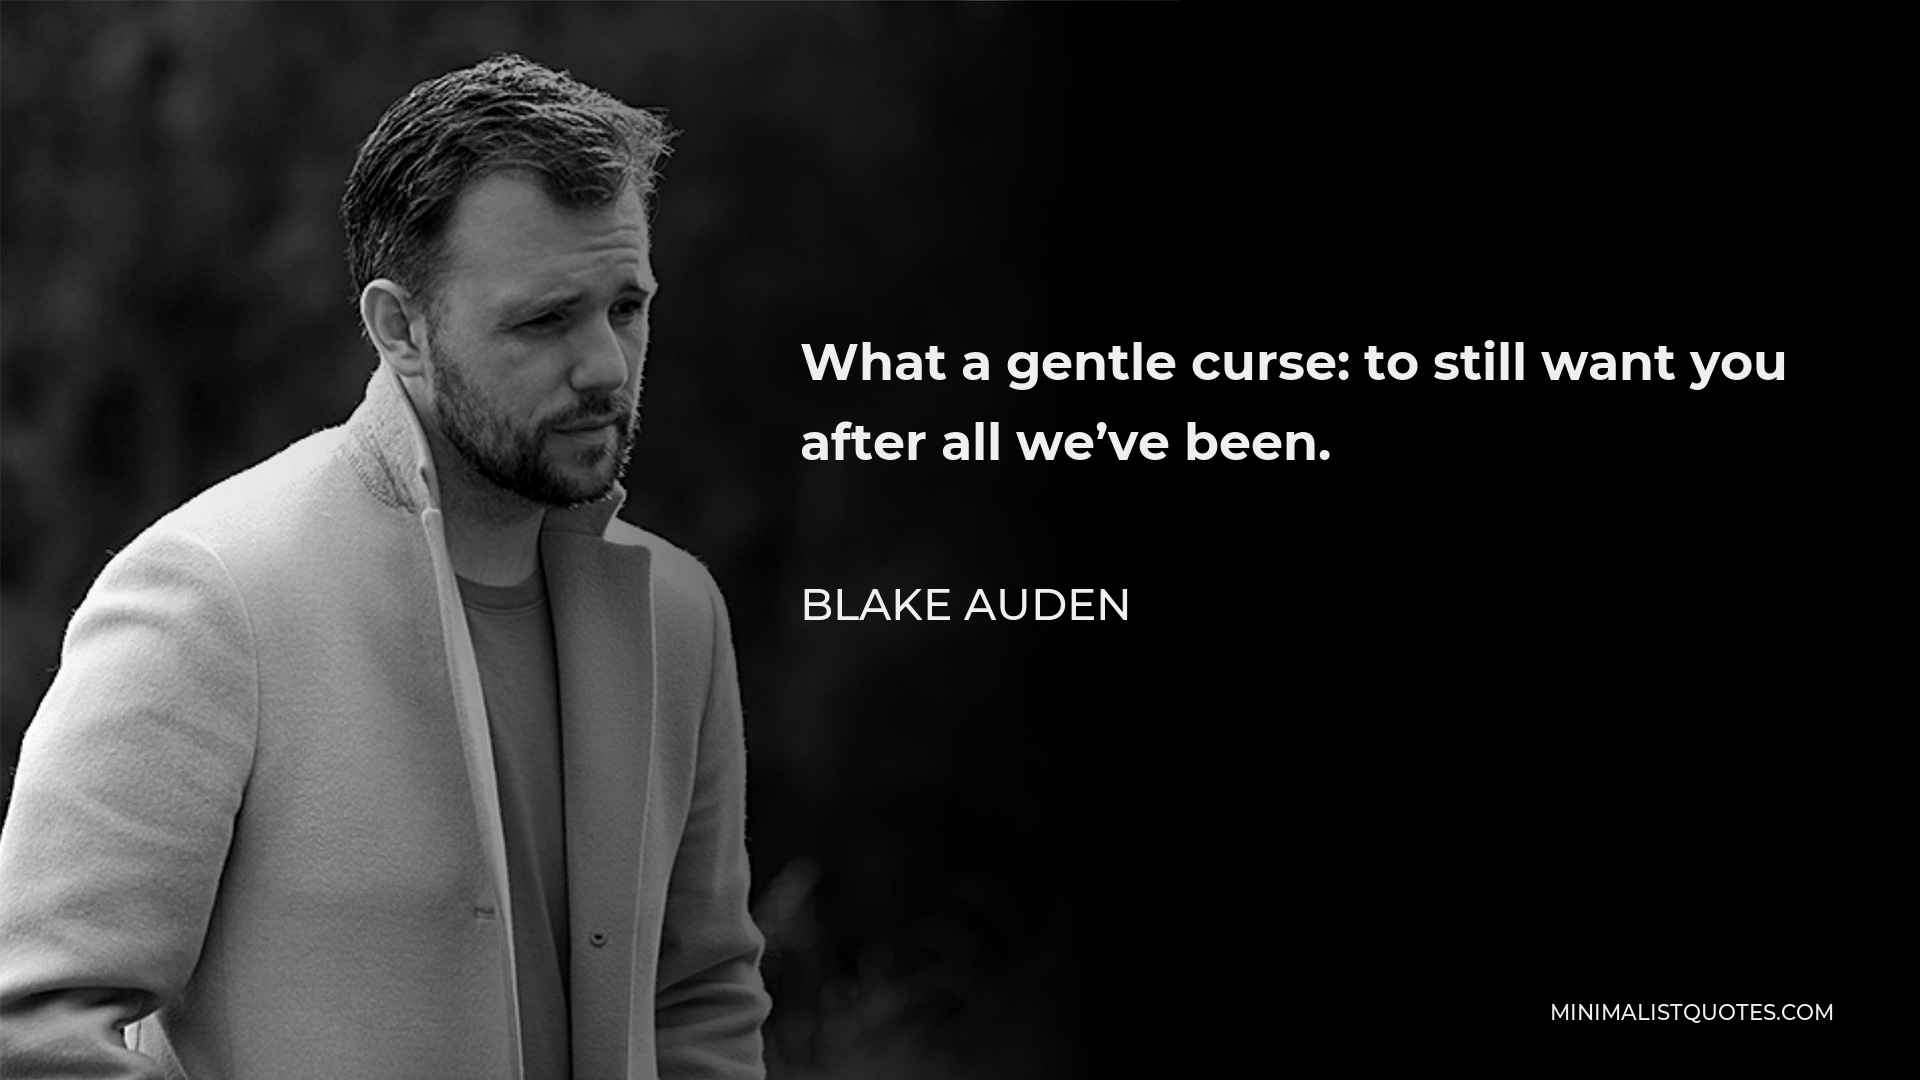 Blake Auden Quote - What a gentle curse: to still want you after all we’ve been.